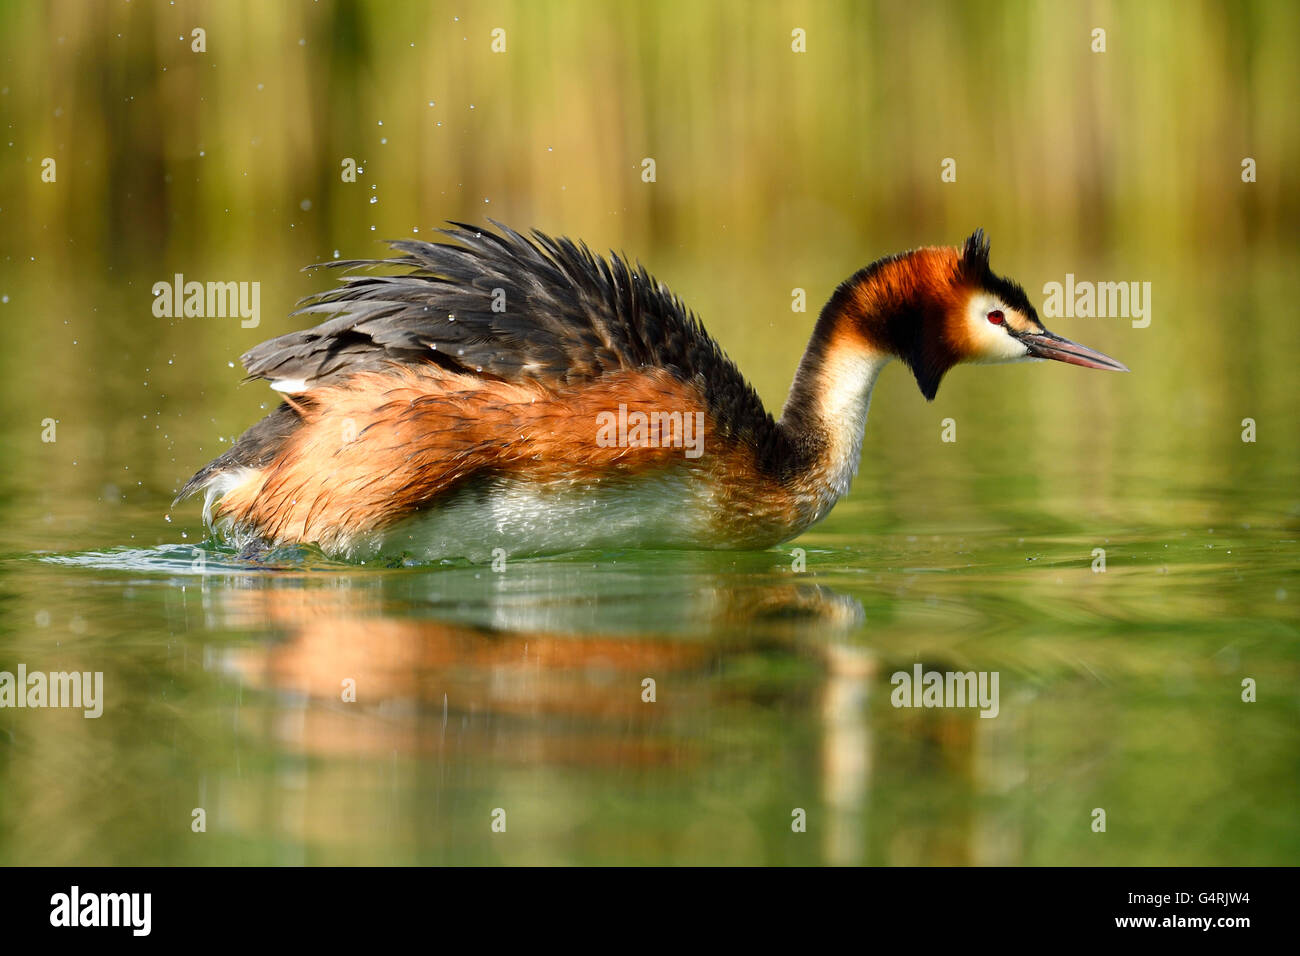 Great crested grebe (Podiceps cristatus) shaking feathers in water, Lake Lucerne, Canton of Lucerne, Switzerland Stock Photo